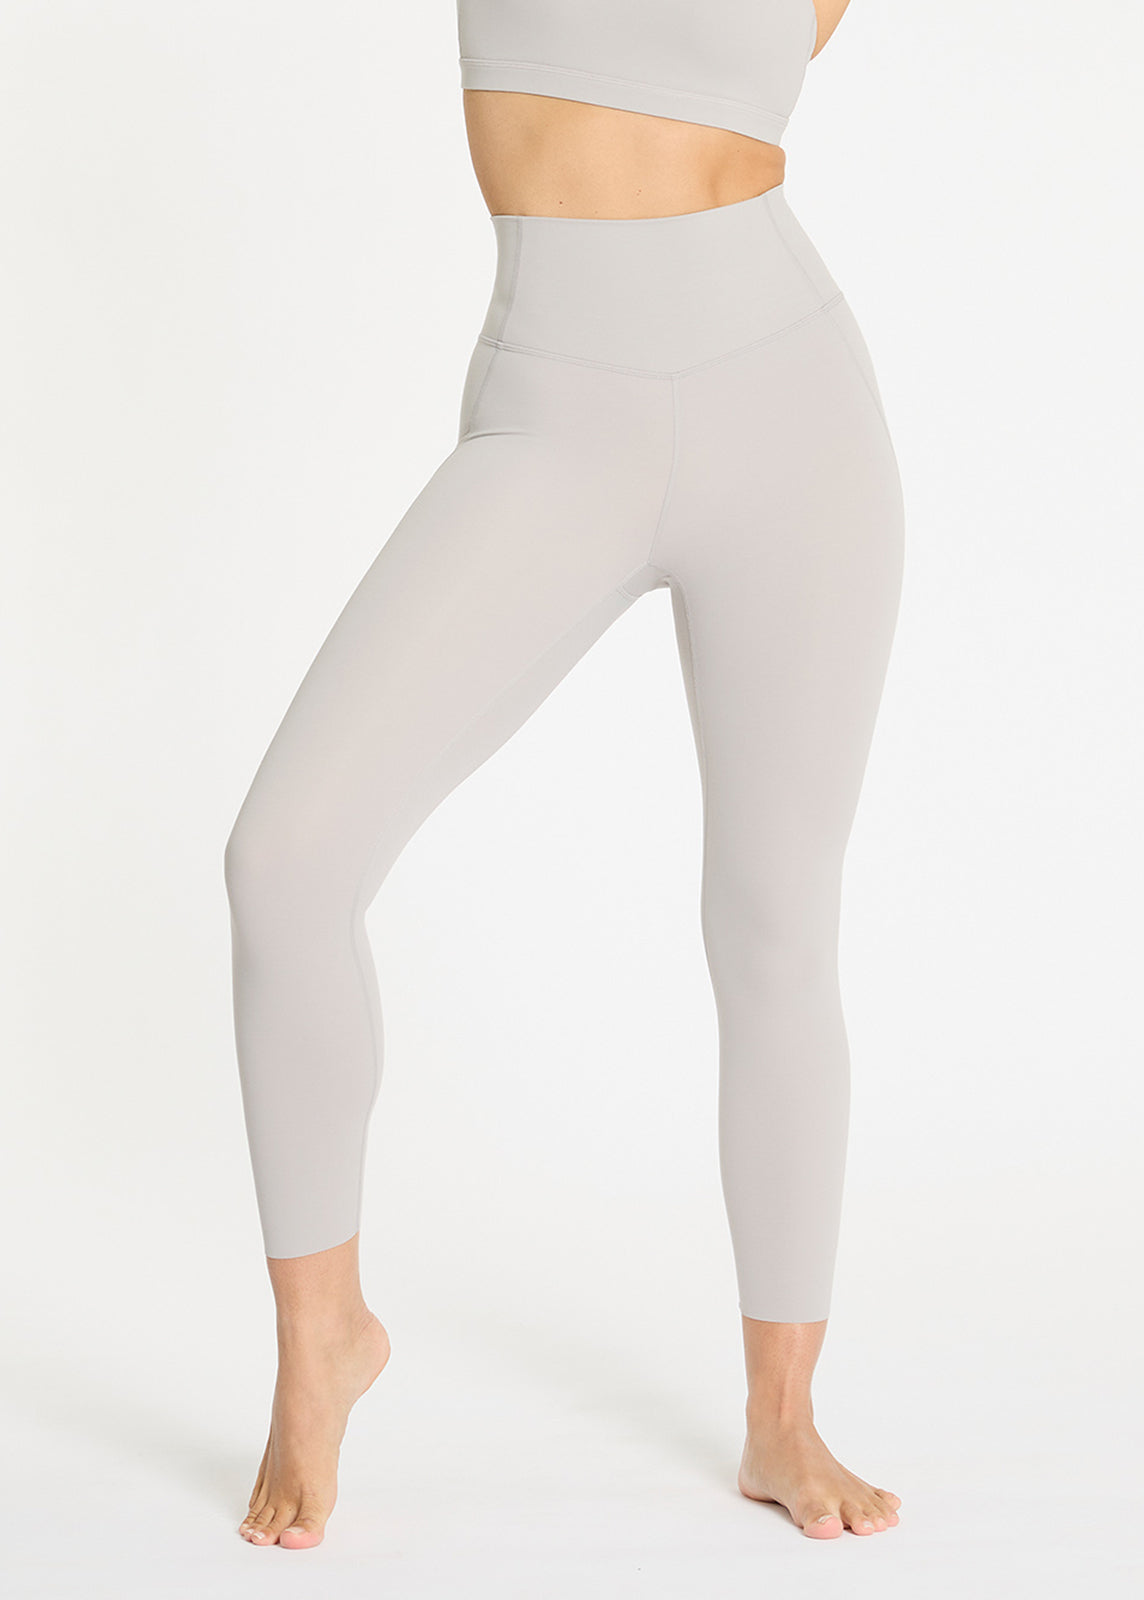 Nimble Activewear - Armadale – Mr and Mrs White